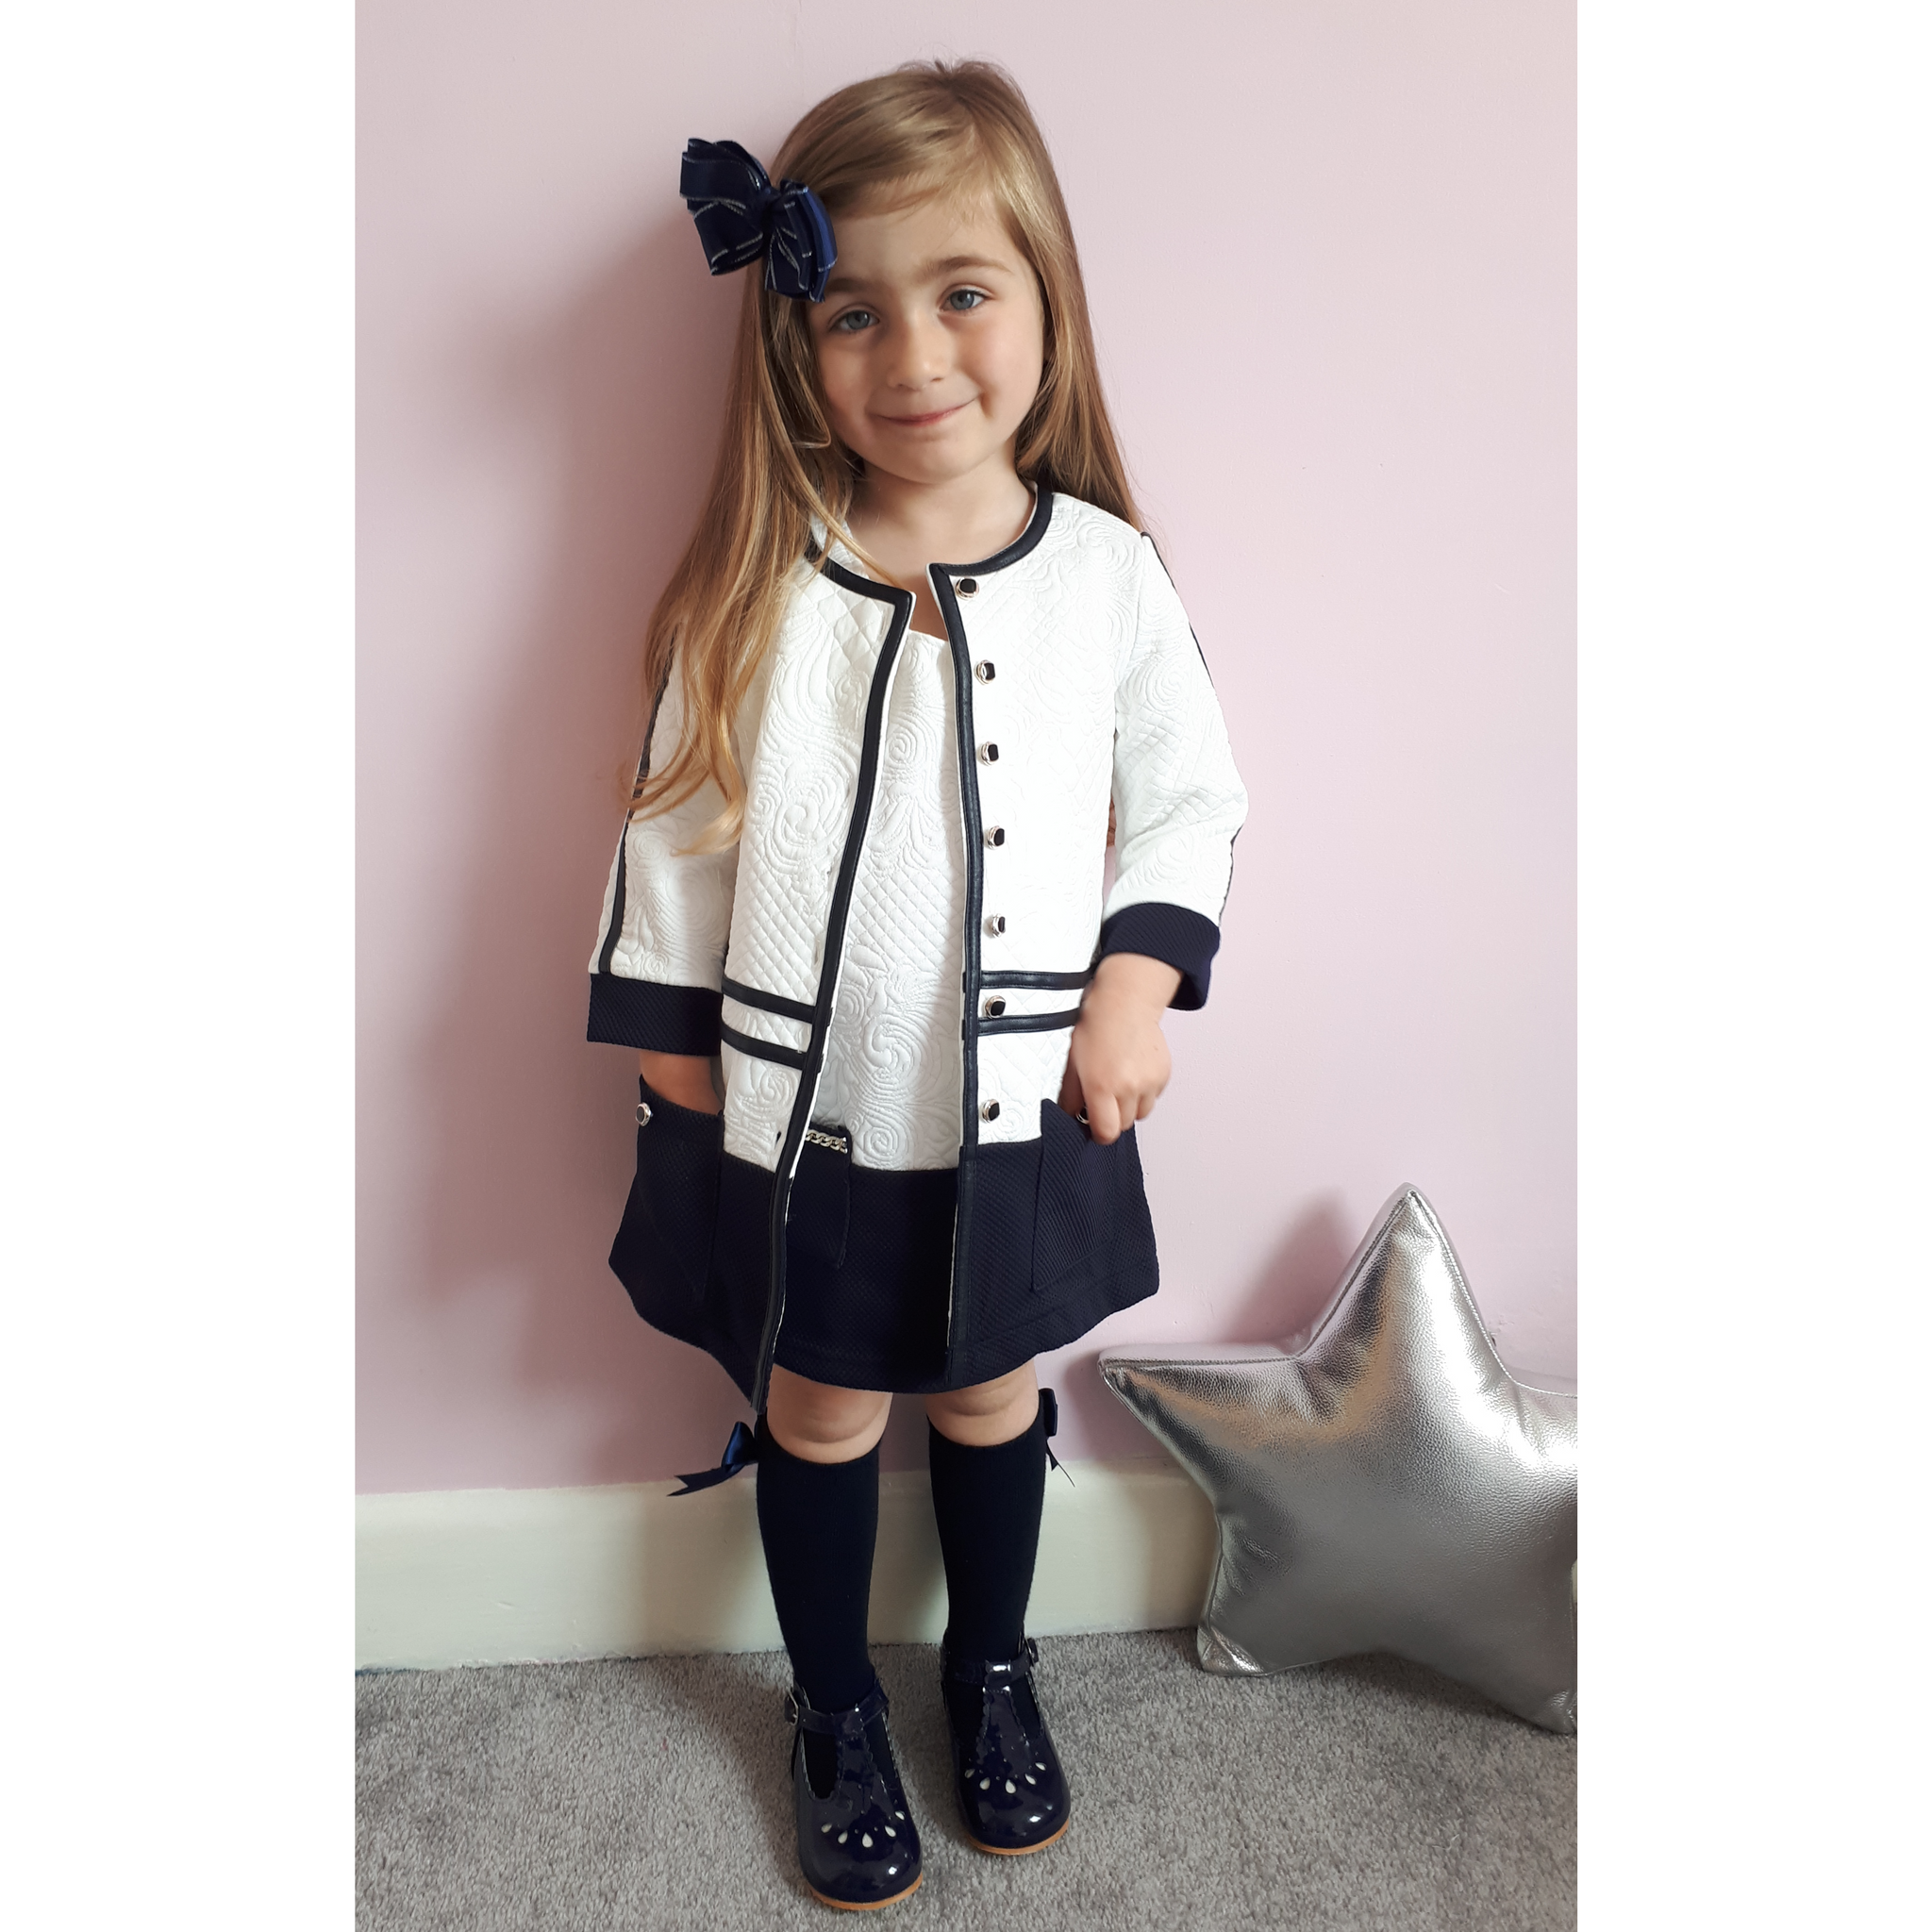 Girl's White & Navy 3-piece outfit